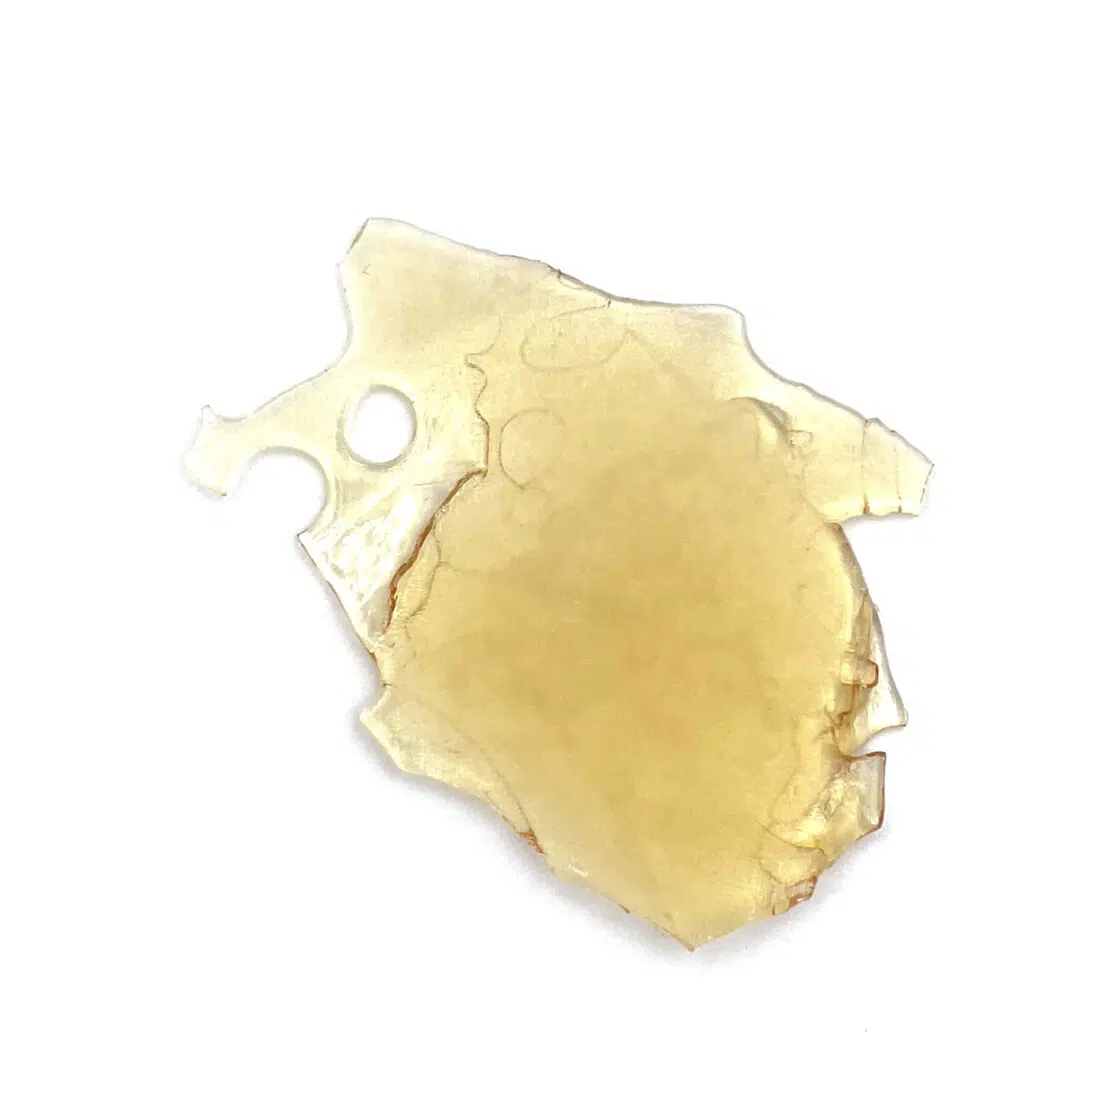 Mexican shatter